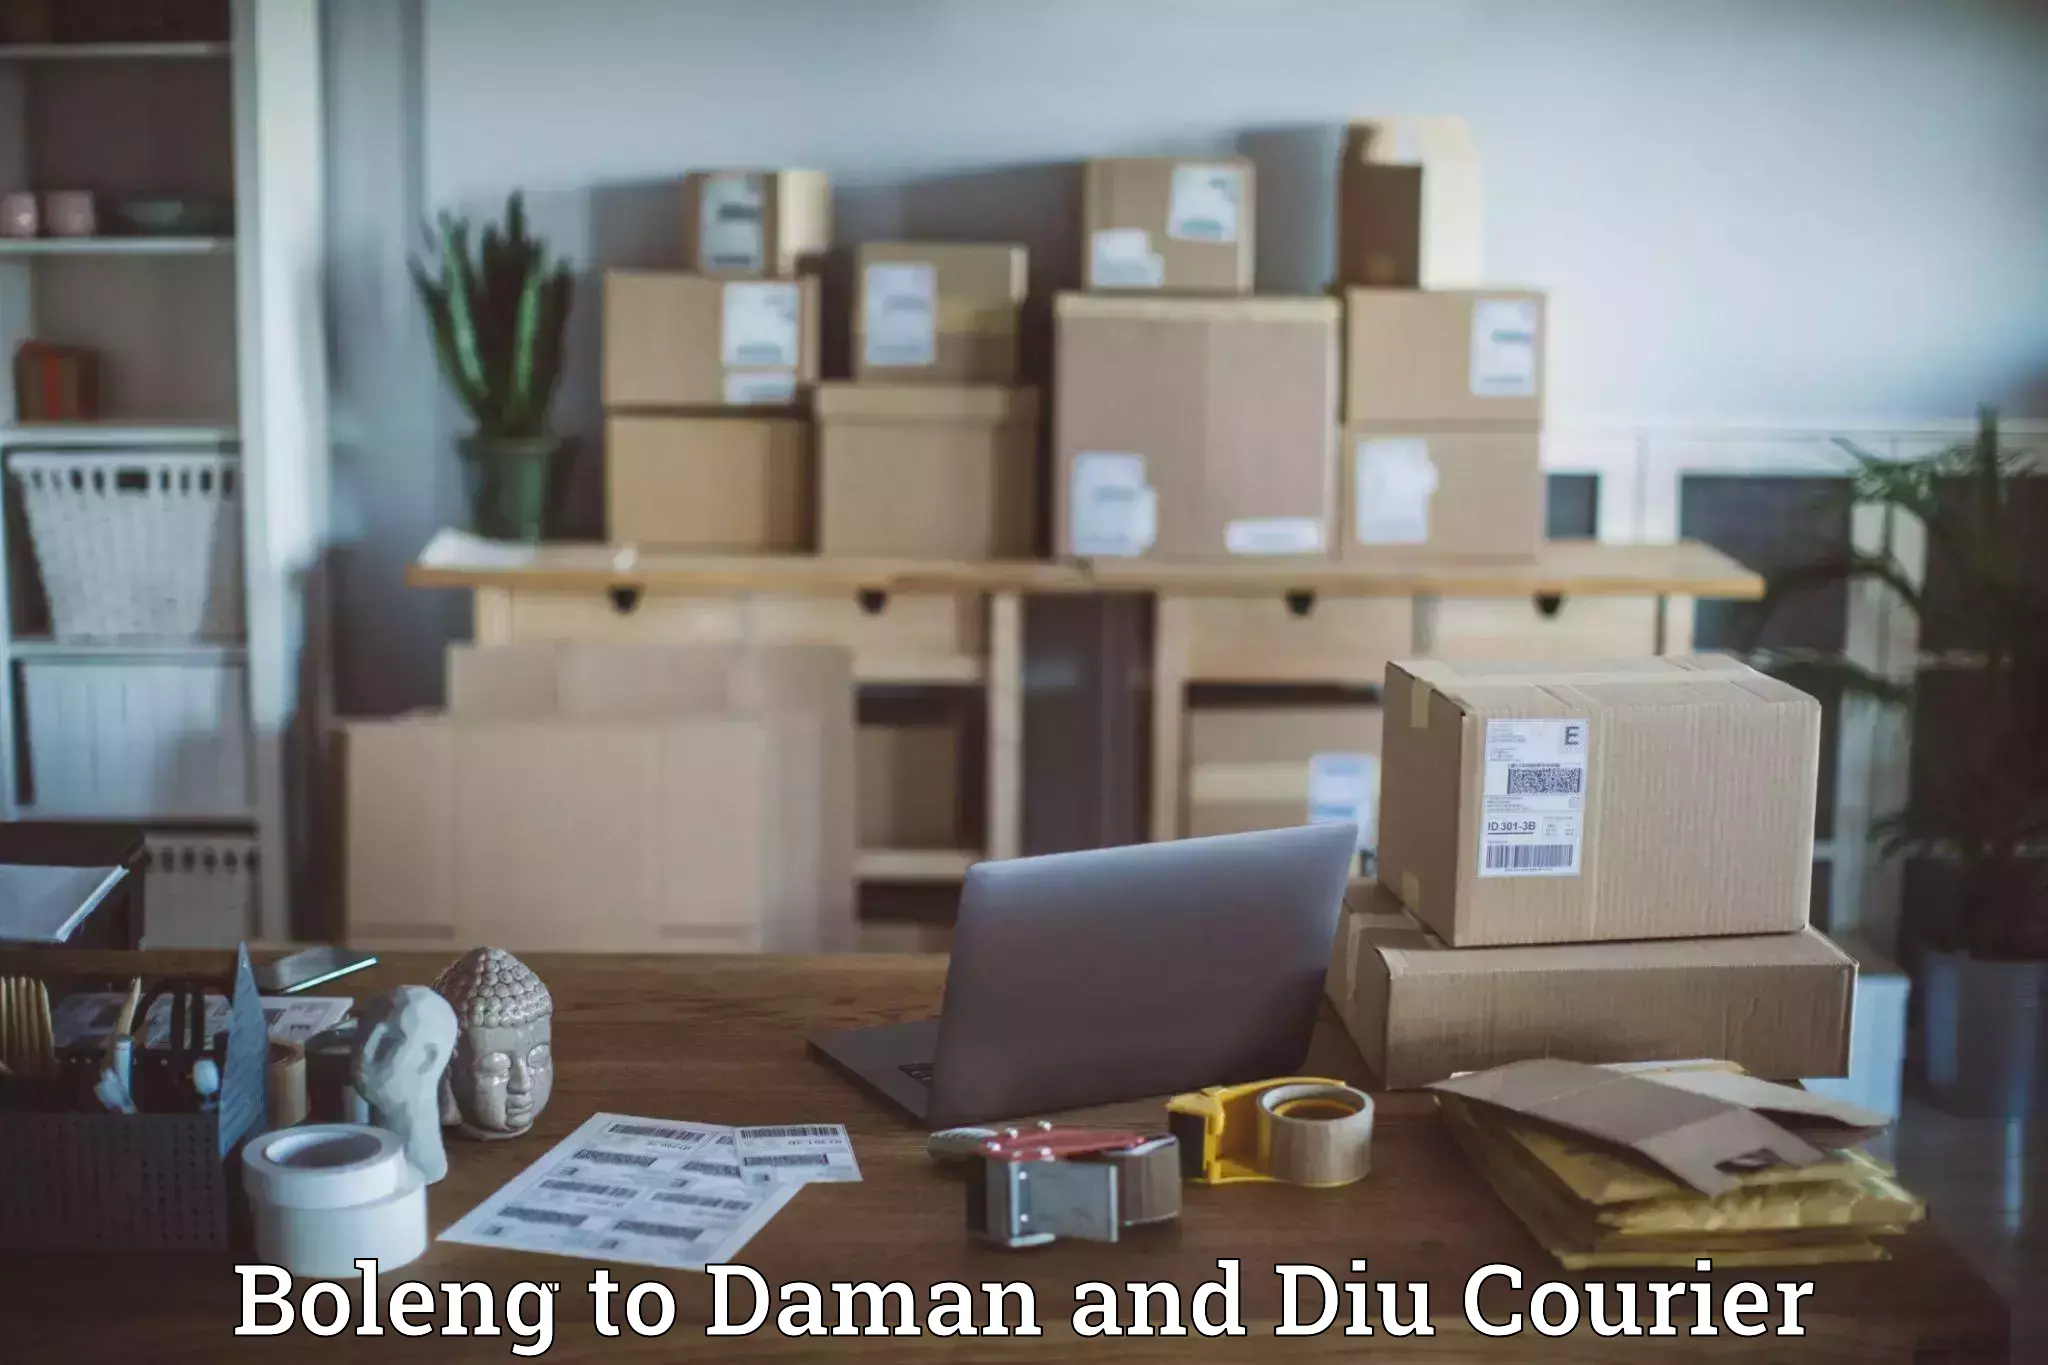 Residential courier service Boleng to Daman and Diu